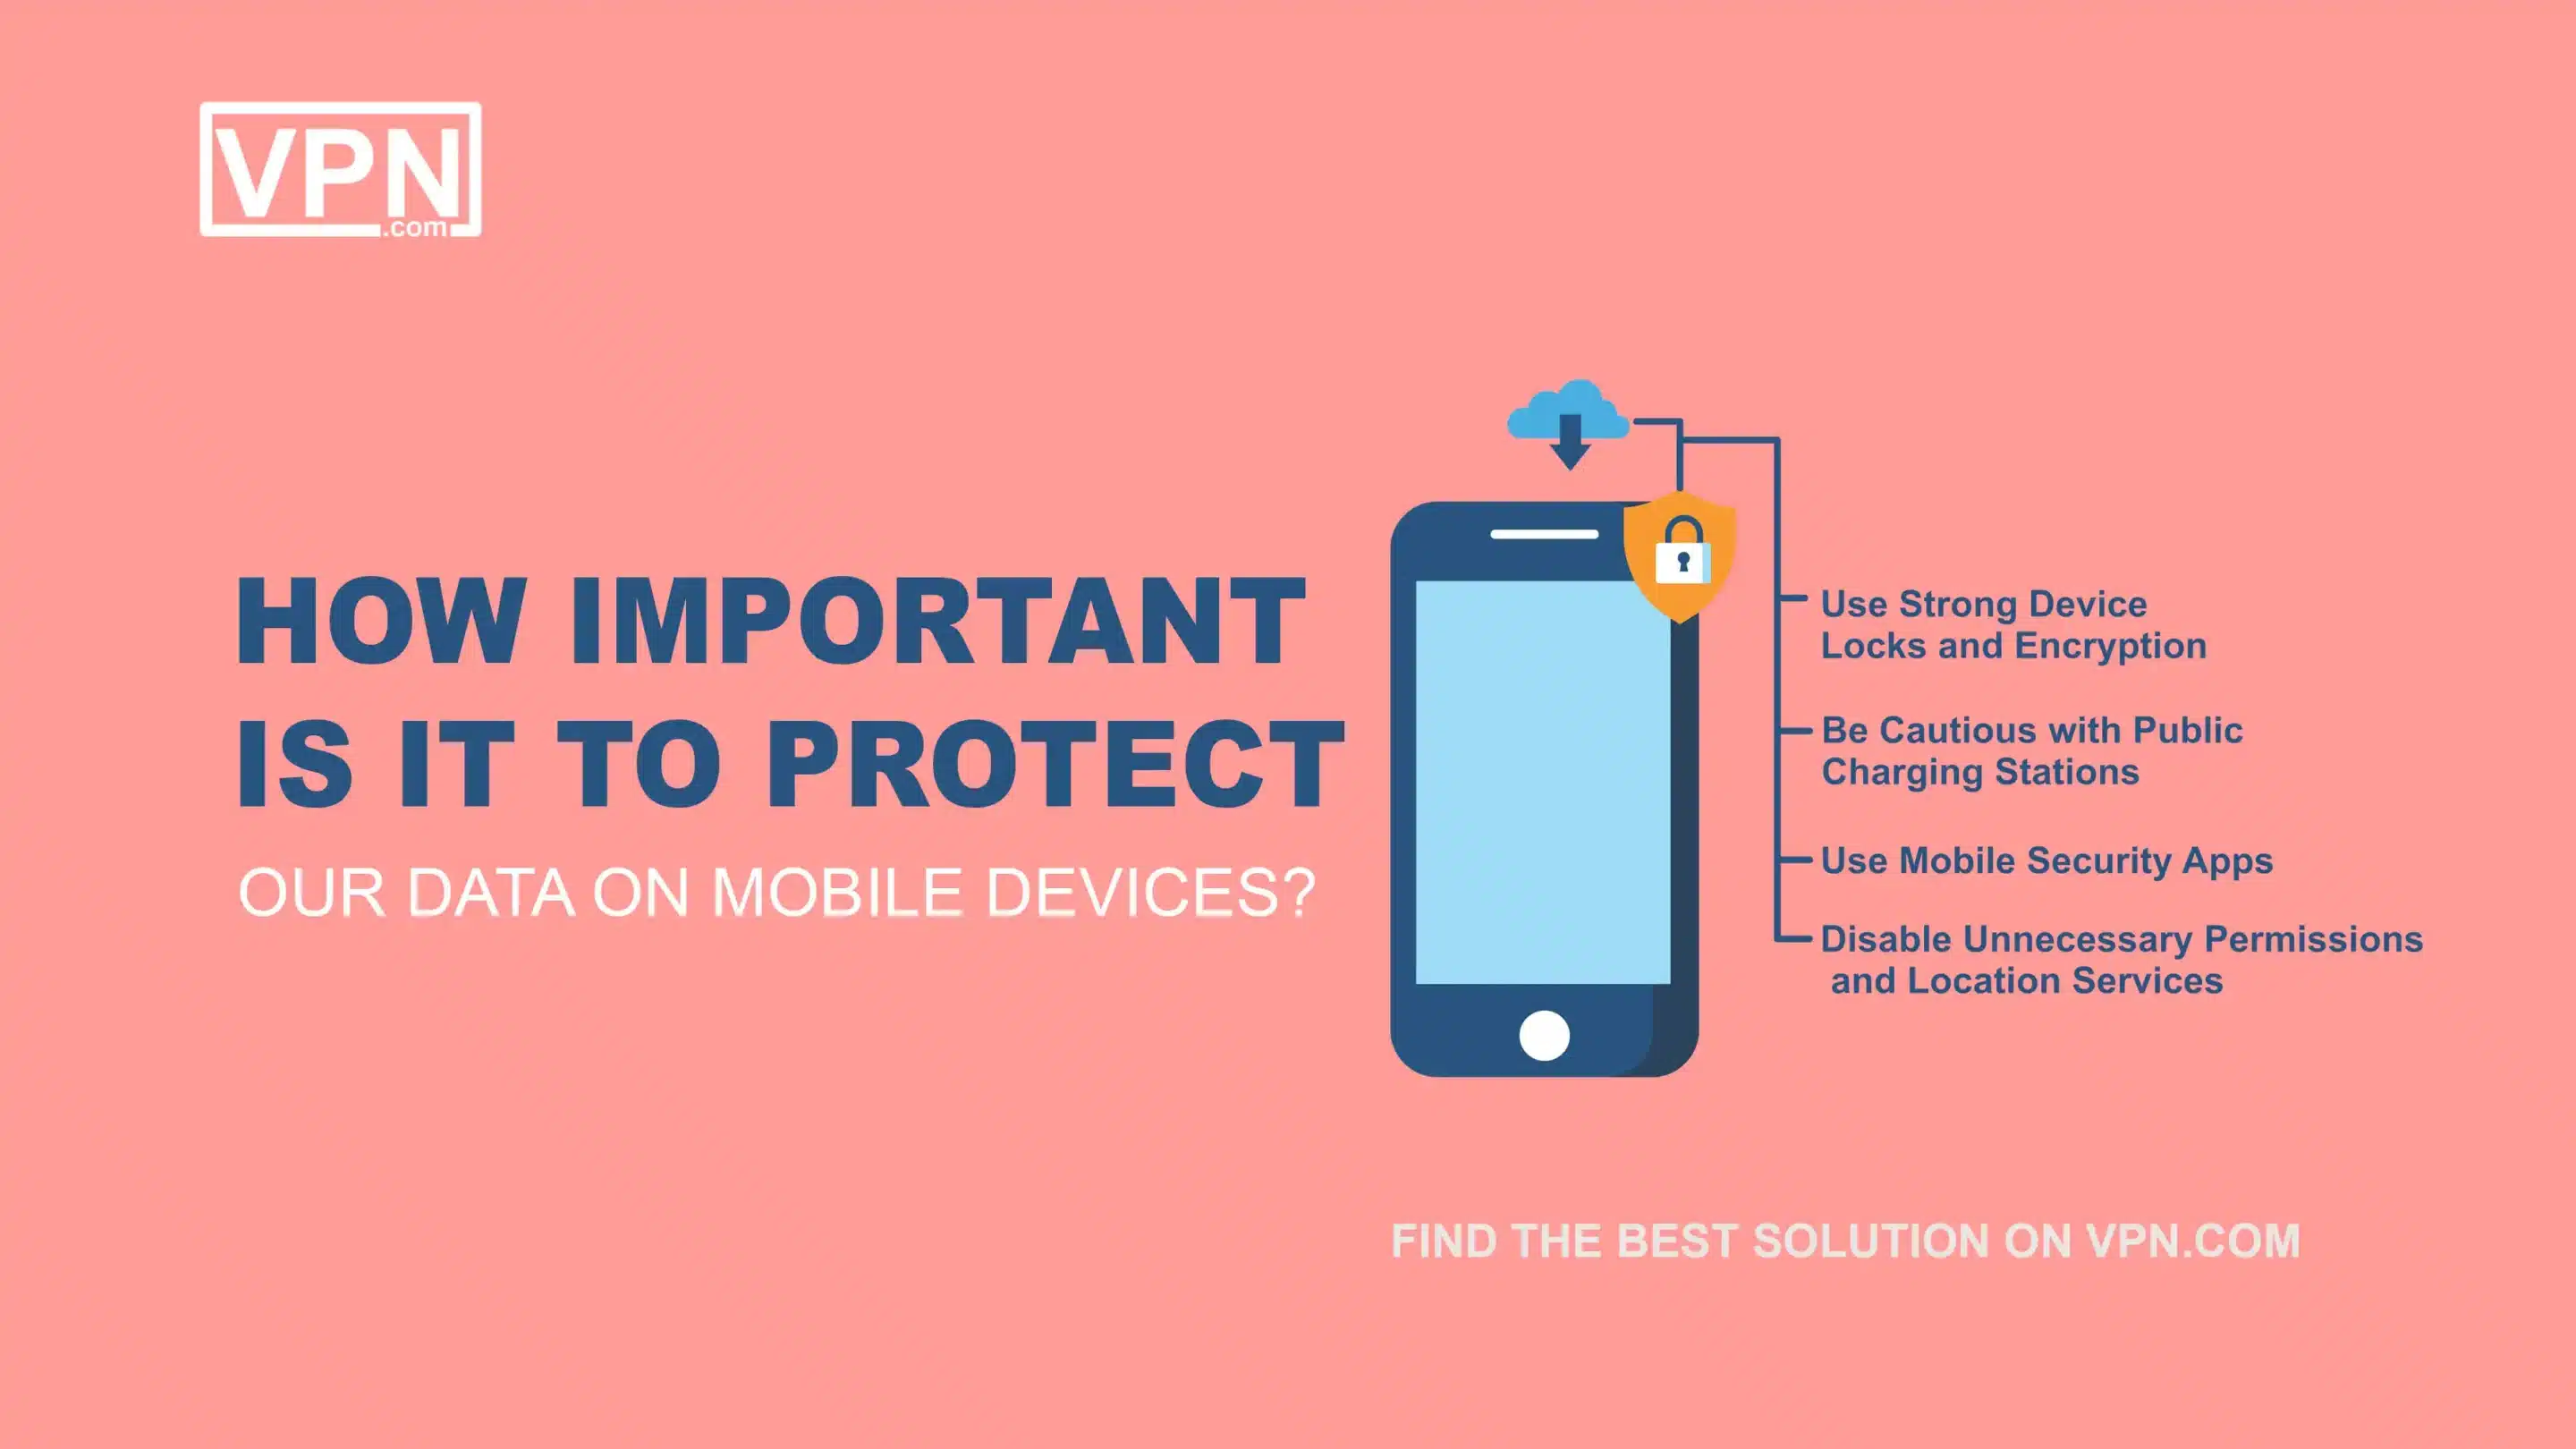 How Important Is It To Protect Your Data on Mobile Devices